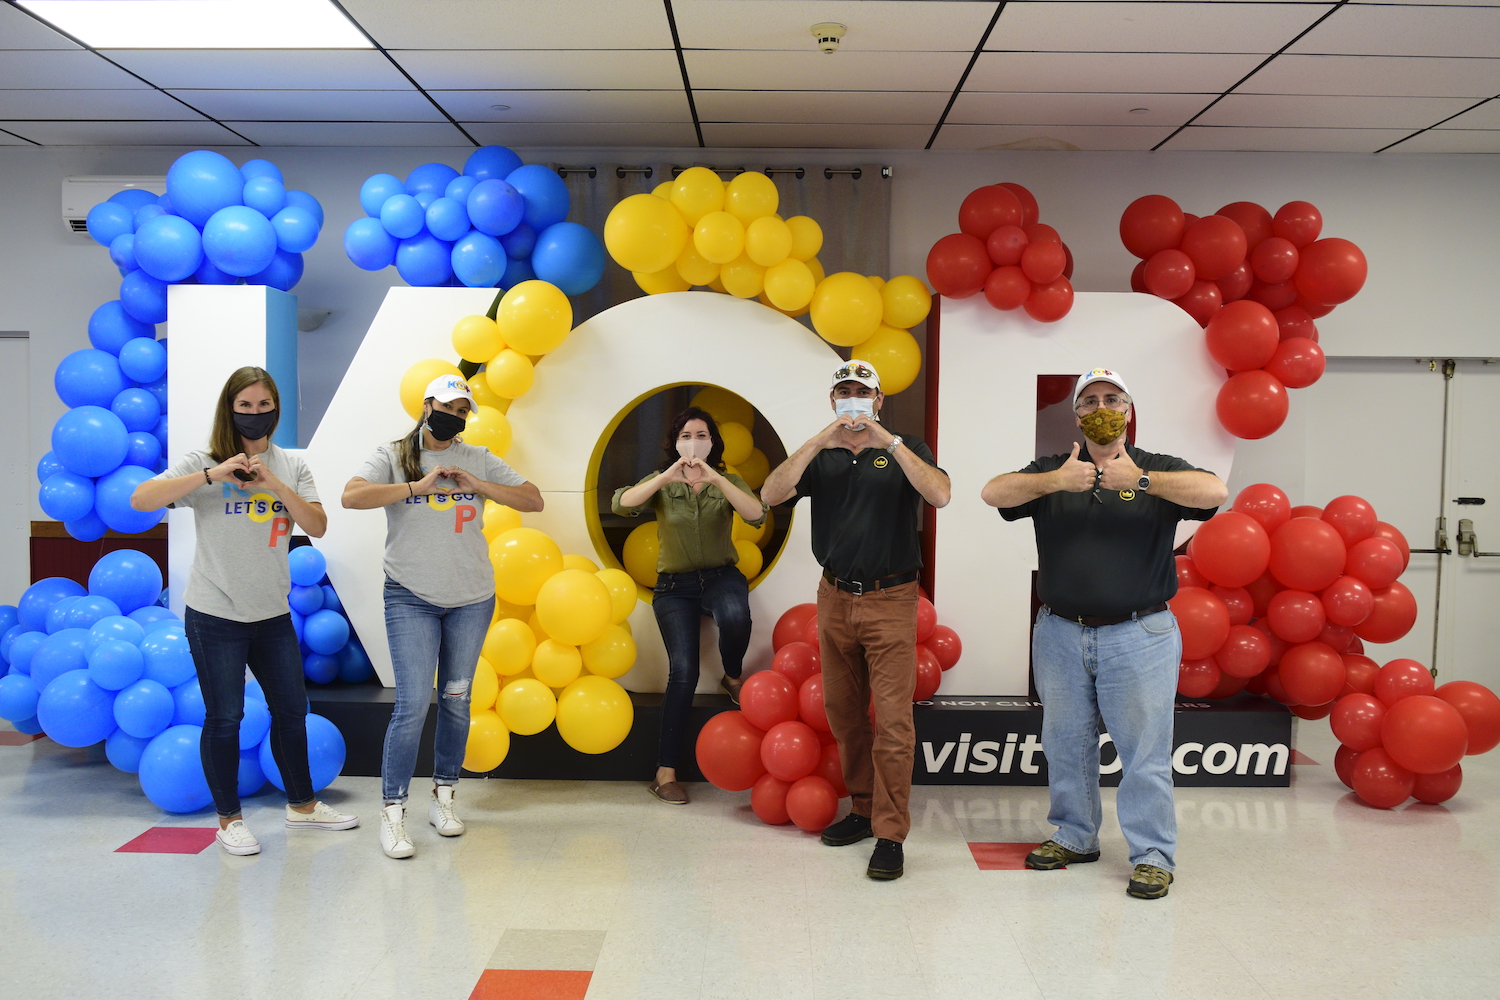 five people standing in front over oversized K-O-P letters that are covered in blue, yellow and red balloons making hearts with their hands